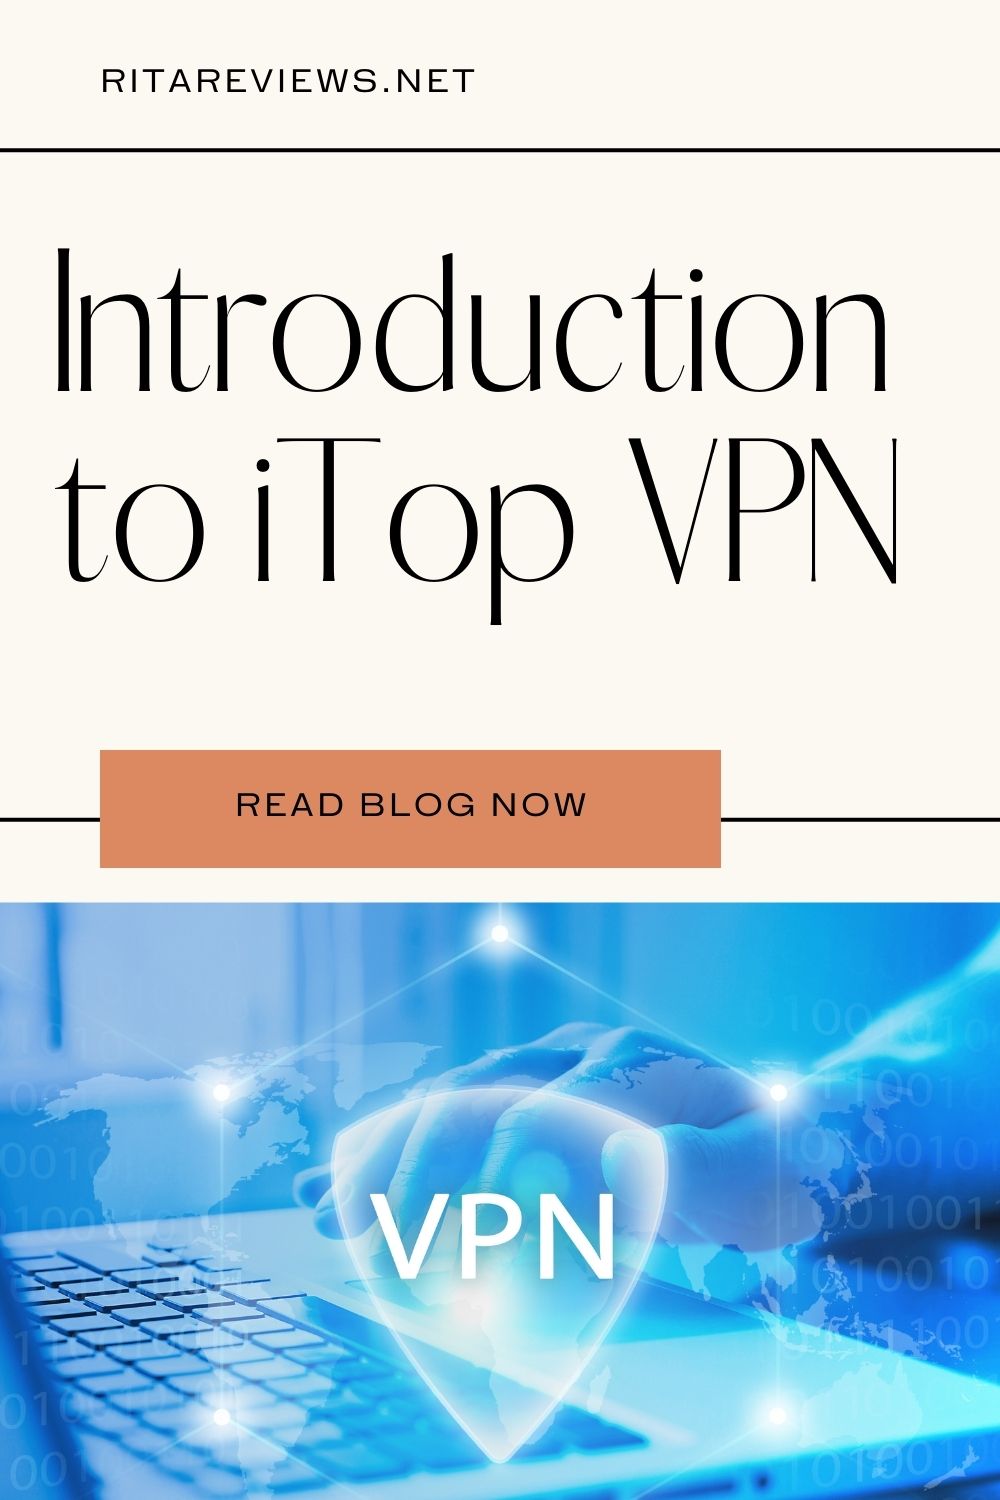 Introduction to iTop VPN